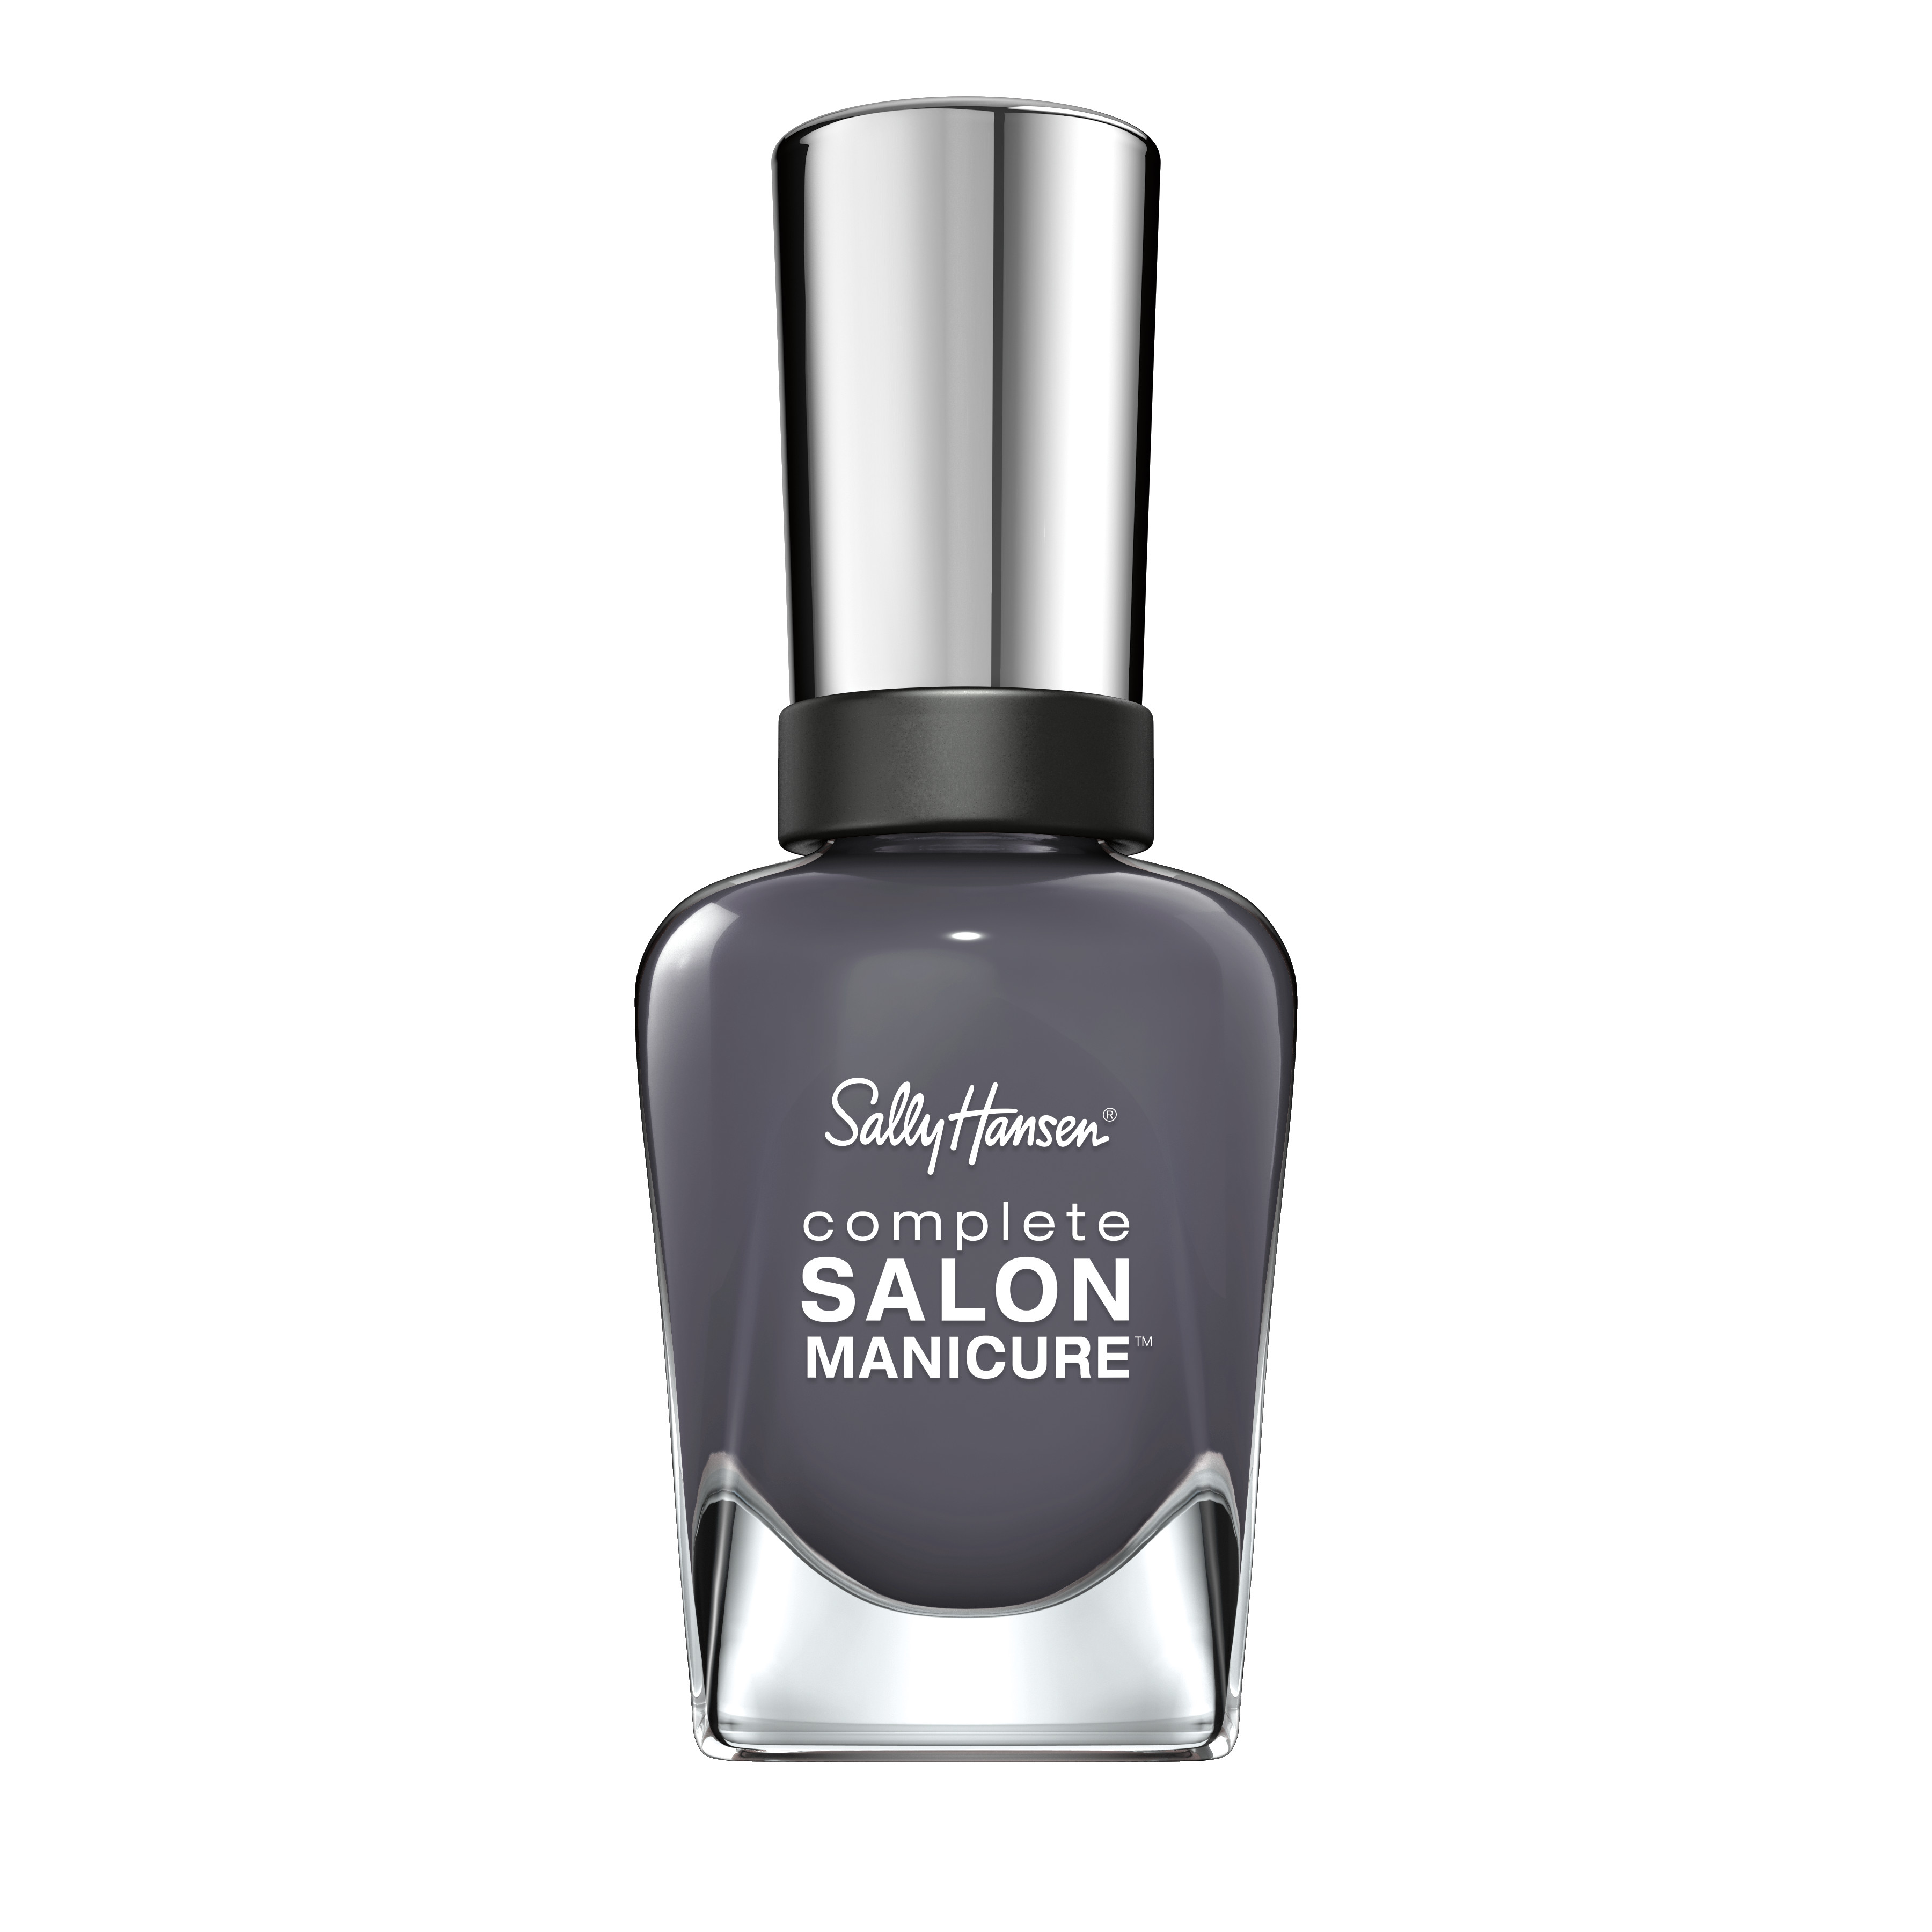 Sally Hansen Complete Salon Manicure Nail Color, Steel My Heart - image 1 of 2